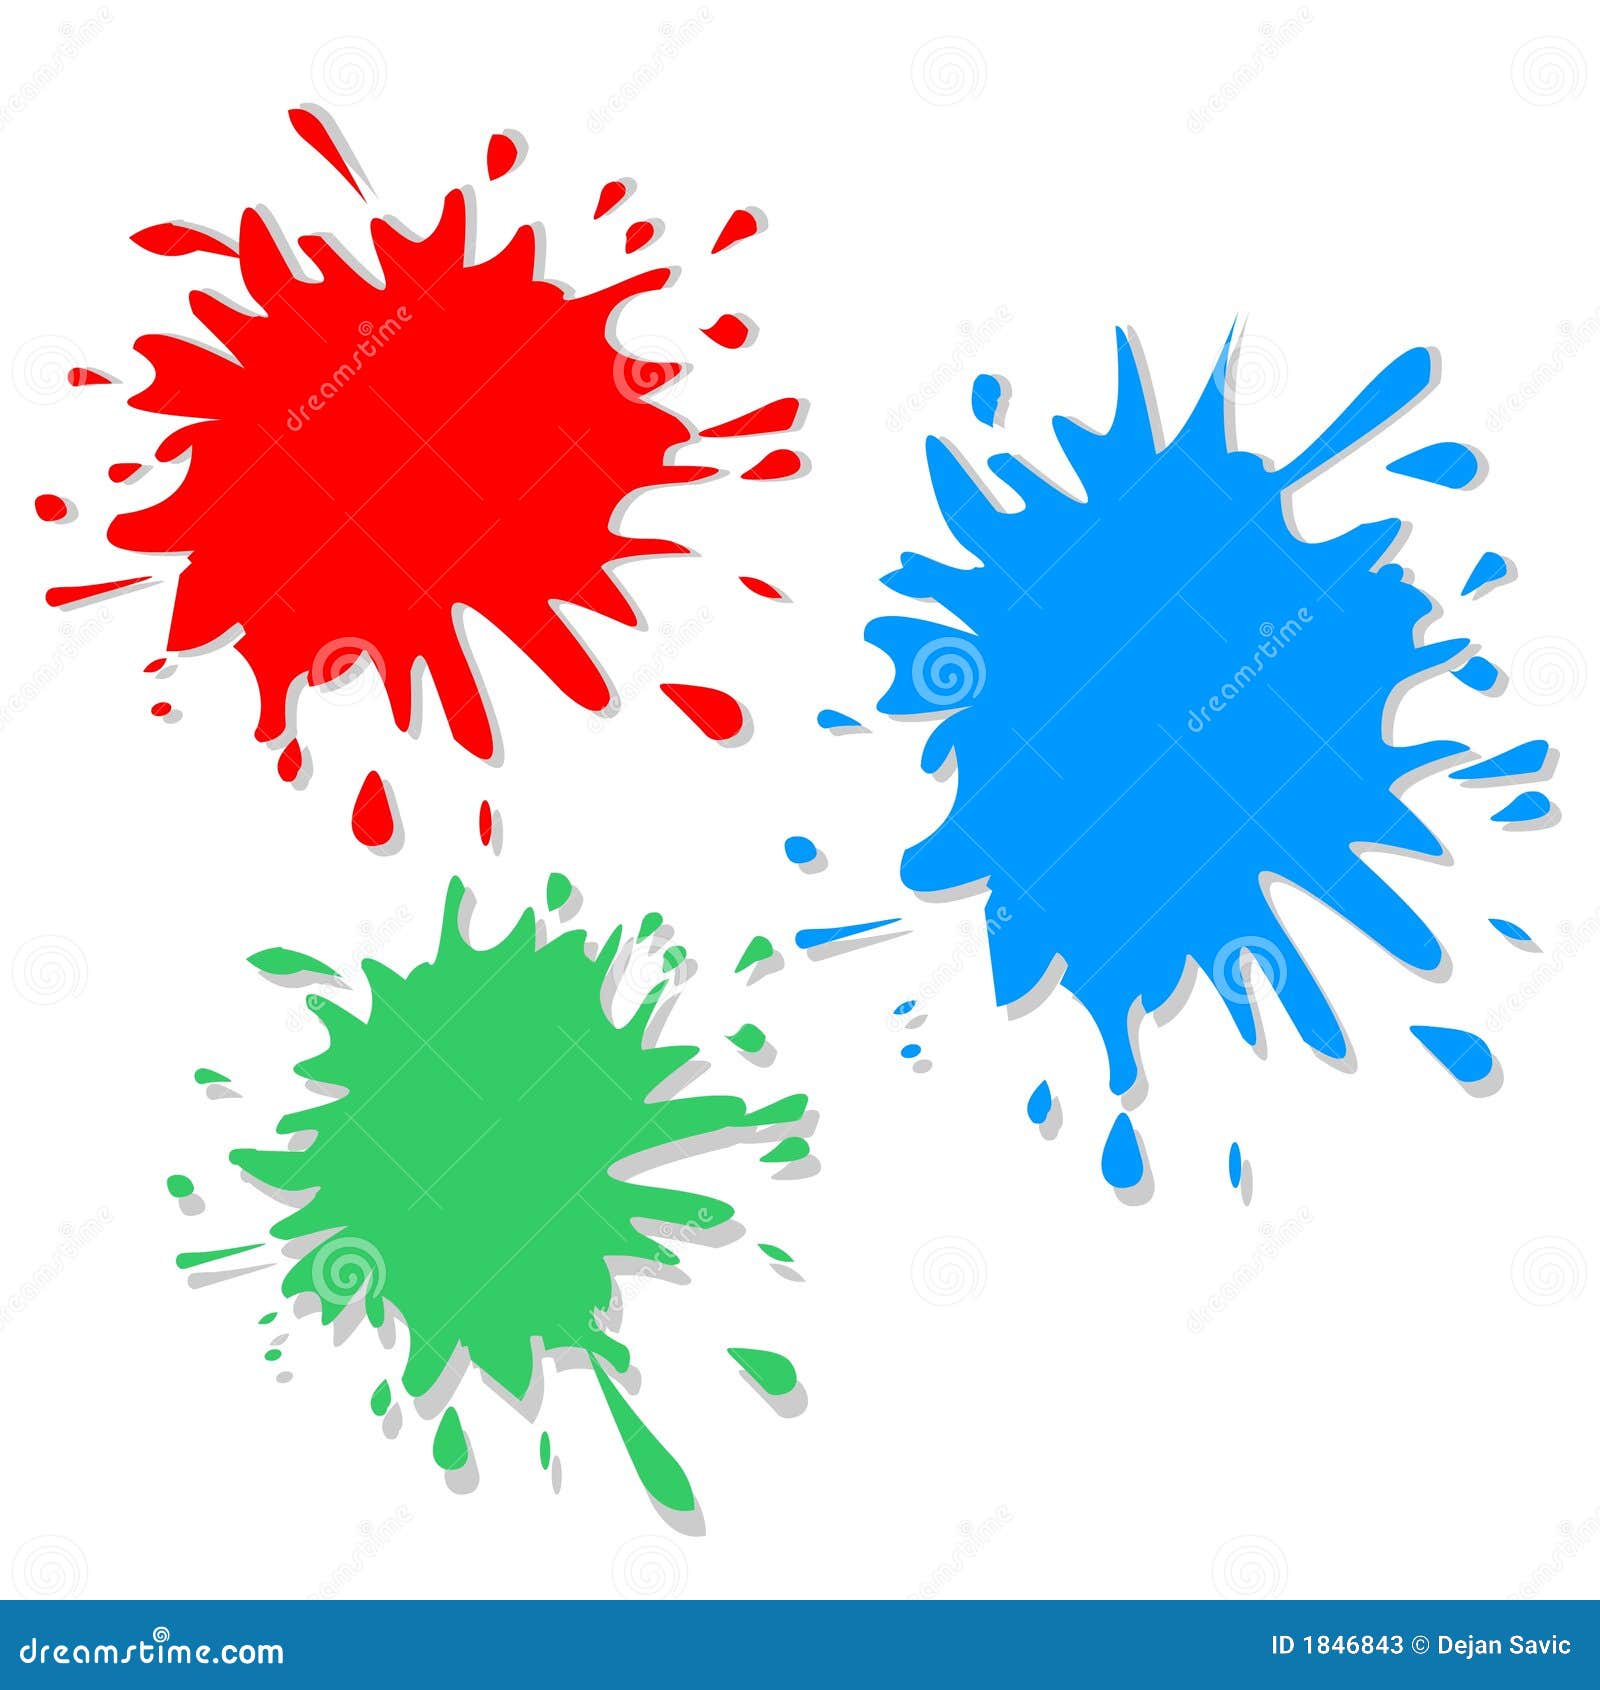 Ink blot stock vector. Illustration of paint, shapes, round - 1846843